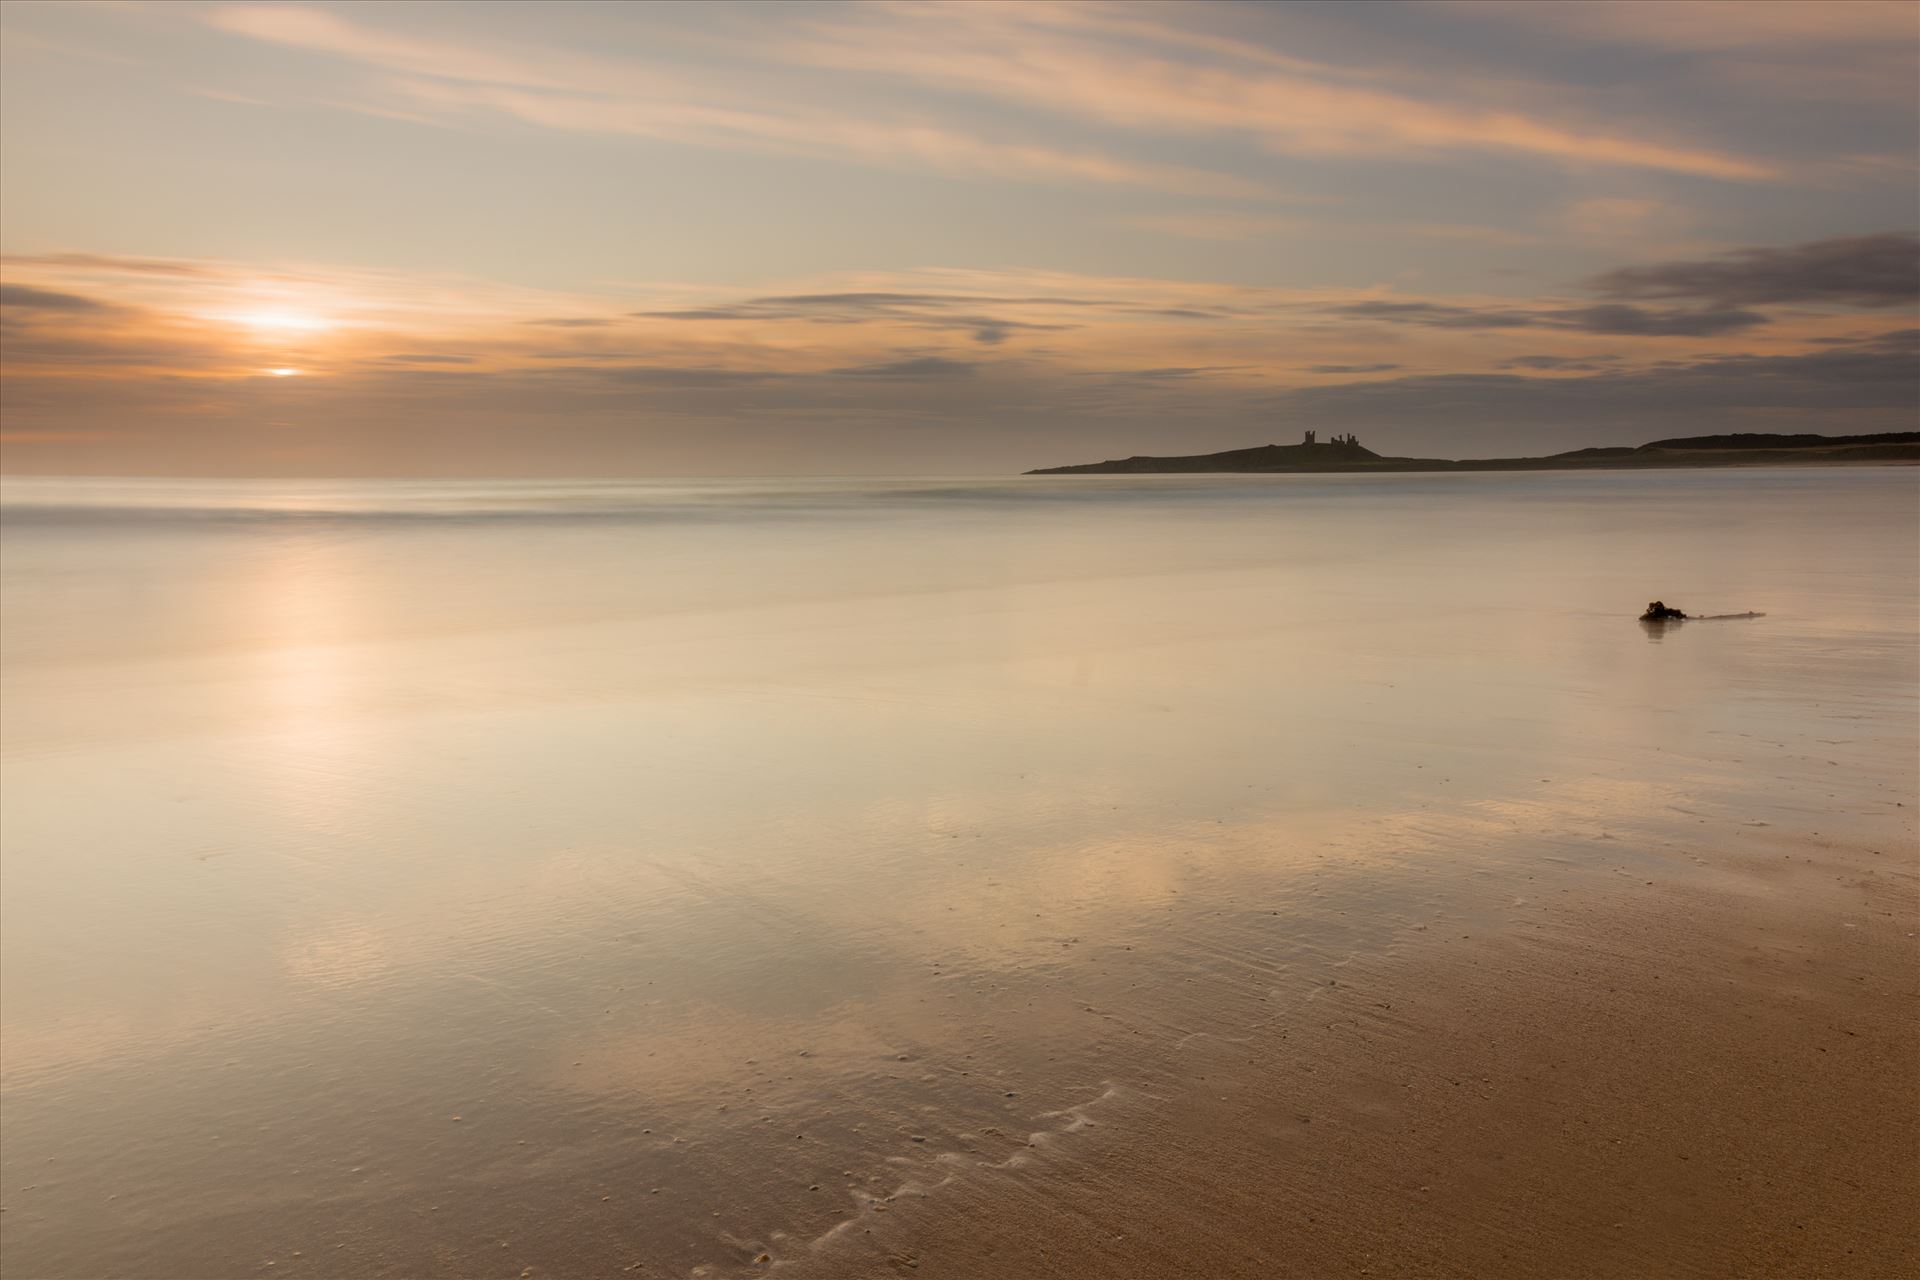 Sunrise at Embleton Bay, Northumberland. (also in black & white) - Embleton Bay is a bay on the North Sea, located to the east of the village of Embleton, Northumberland, England. It lies just to the south of Newton-by-the-Sea and north of Craster by philreay